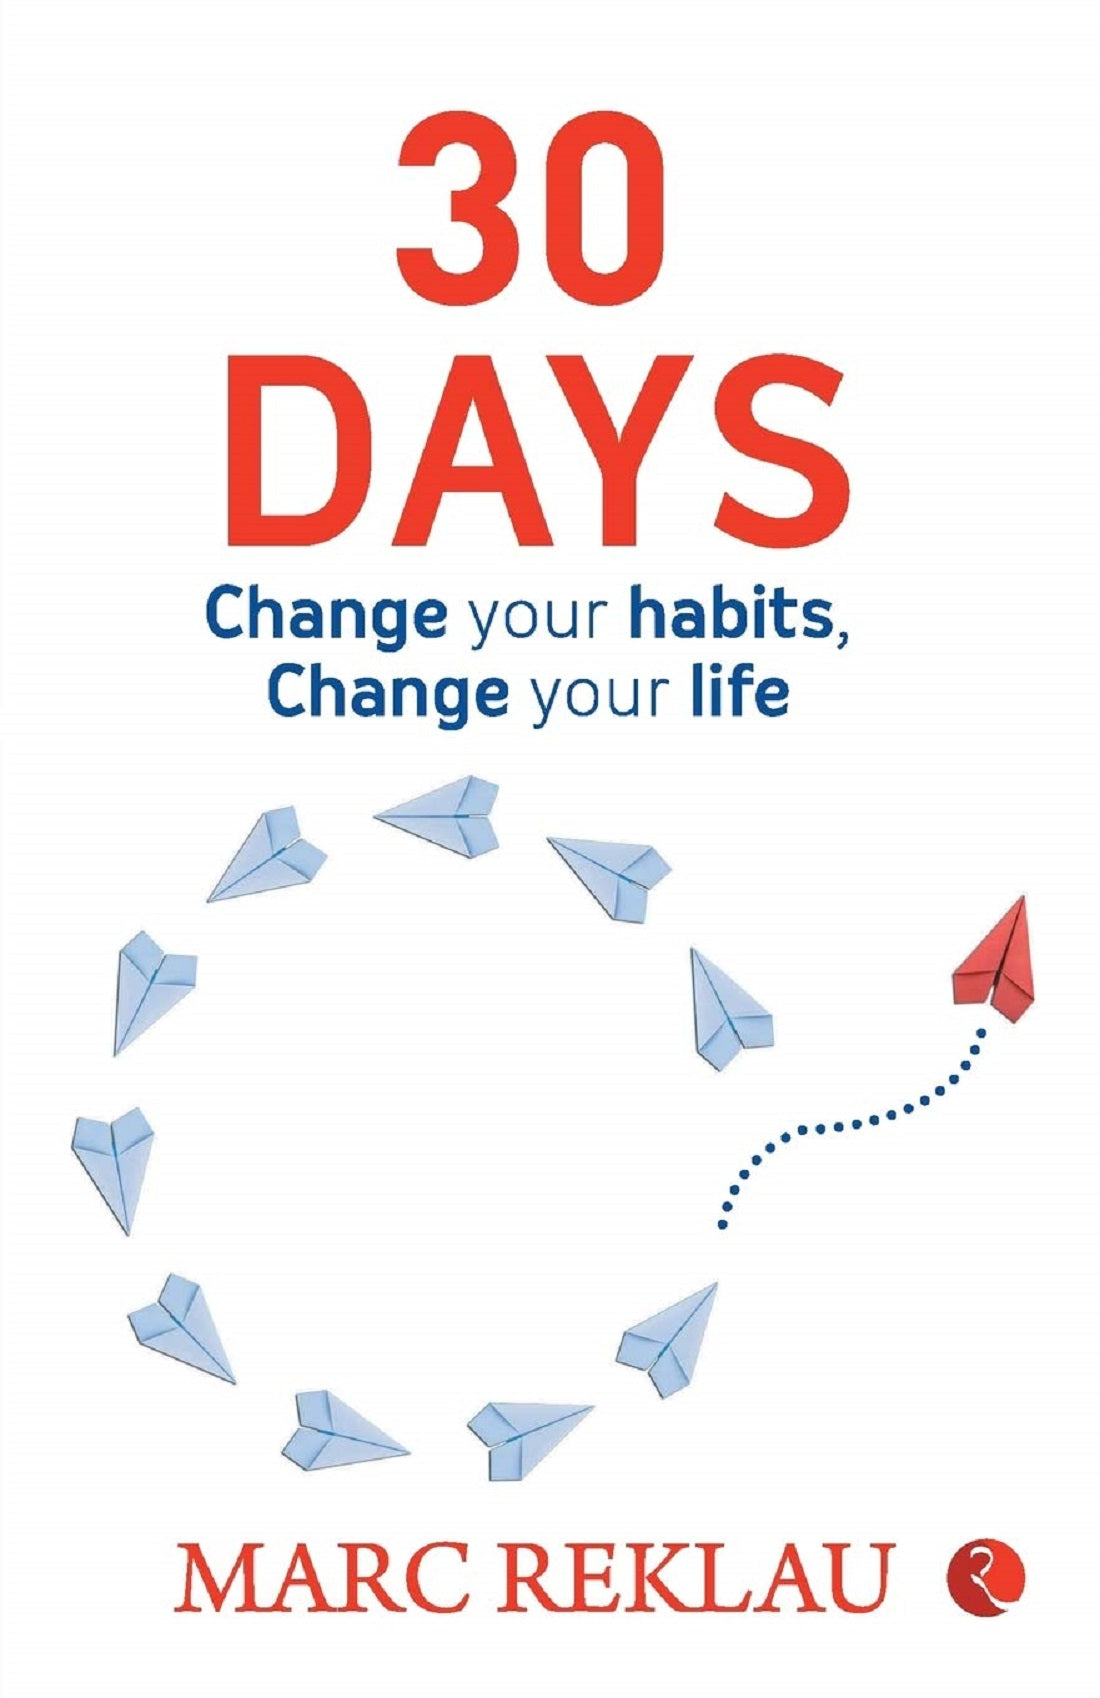 30 DAYS CHANGE YOUR HABBITS, CHANGE YOUR LIFE